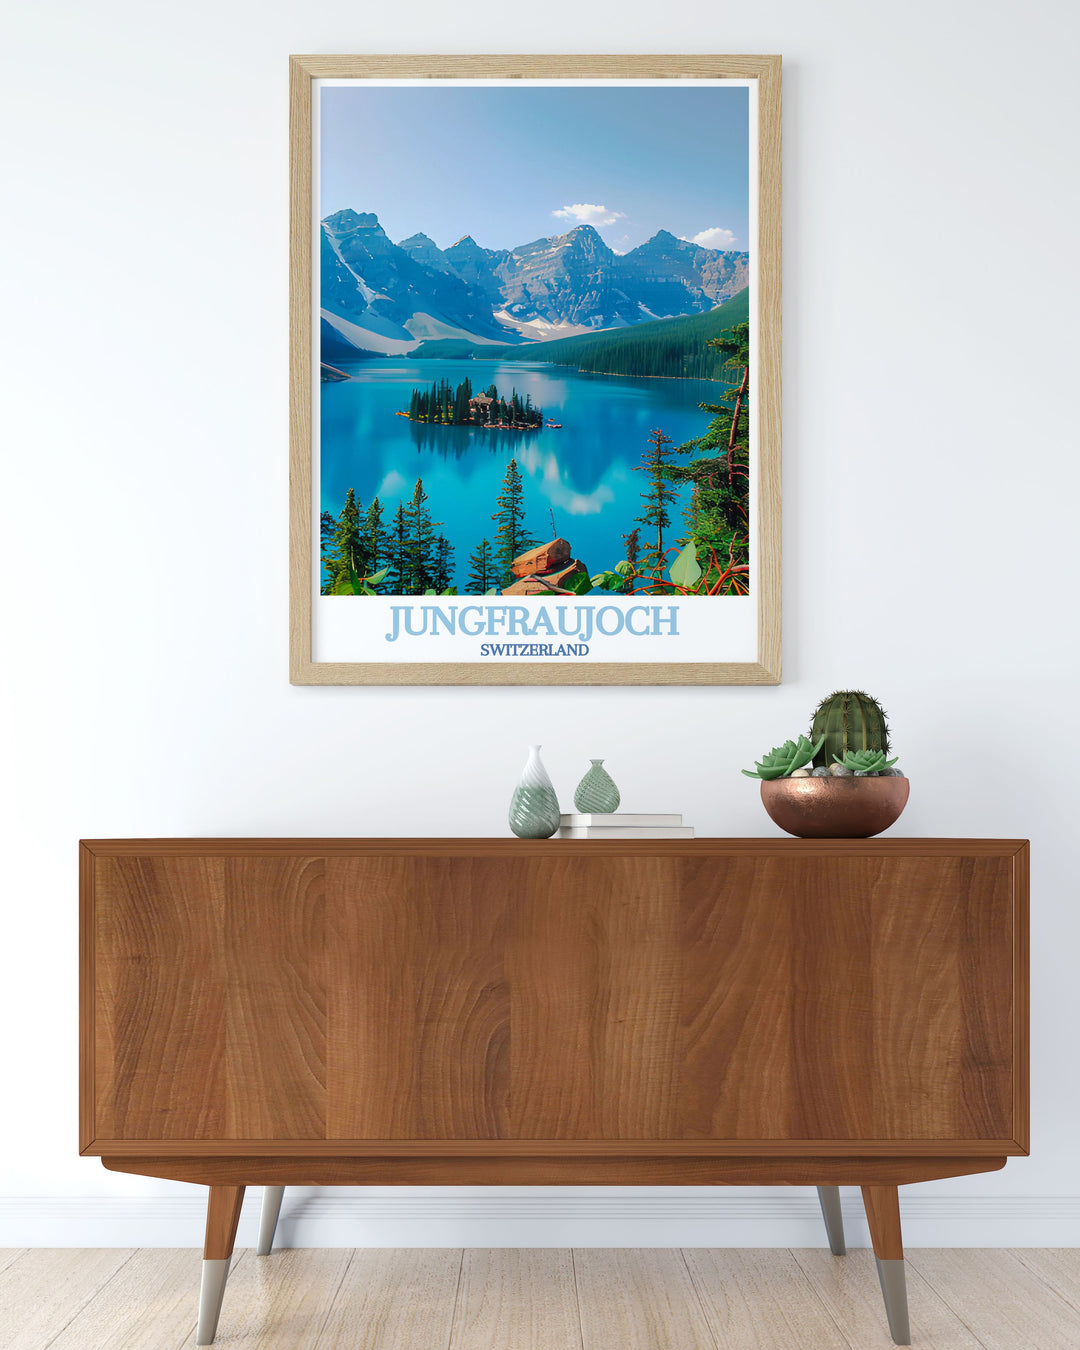 This travel poster of Jungfraujoch in Switzerland captures the breathtaking views from the highest railway station in Europe, set against the stunning Bernese Alps.